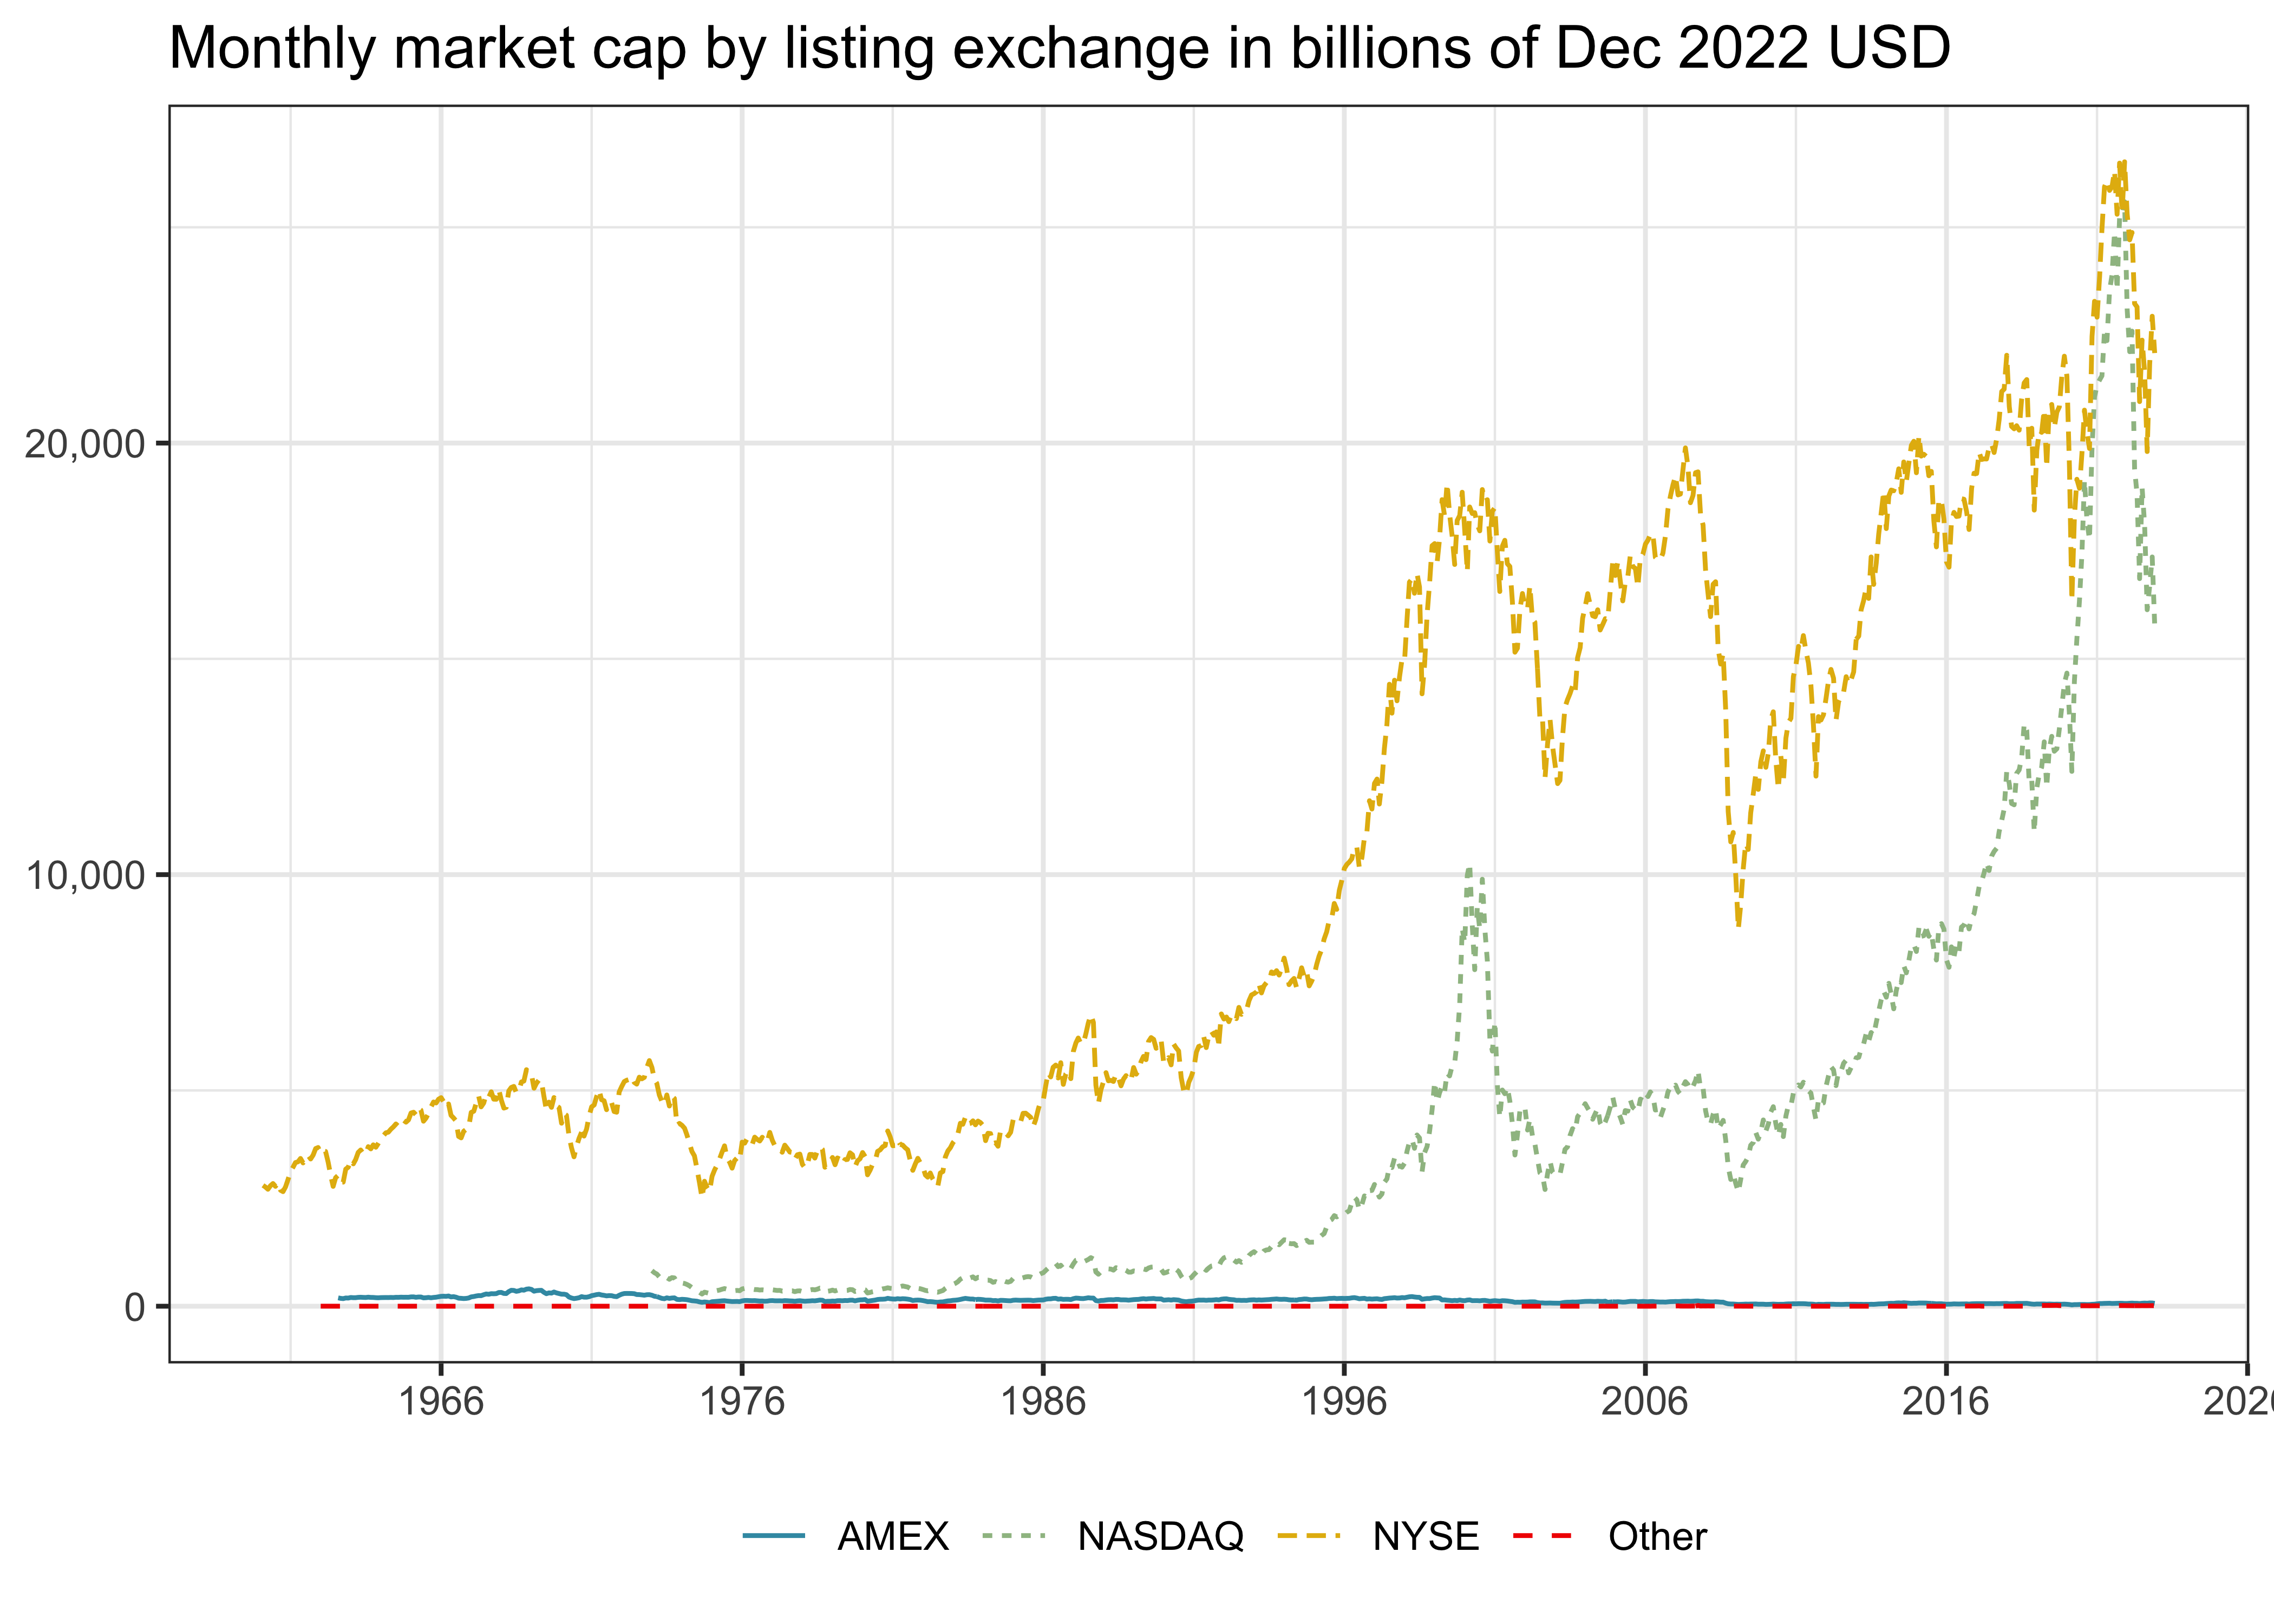 Title: Monthly market cap by listing exchange in billion USD as of Dec 2021. The figure shows a line chart of the total market capitalization of all stocks aggregated by the listing exchange from 1960 to 2021, with years on the horizontal axis and the corresponding market capitalization on the vertical axis. Historically, NYSE listed stocks had the highest market capitalization. In the more recent past, the valuation of NASDAQ listed stocks exceeded that of NYSE listed stocks.